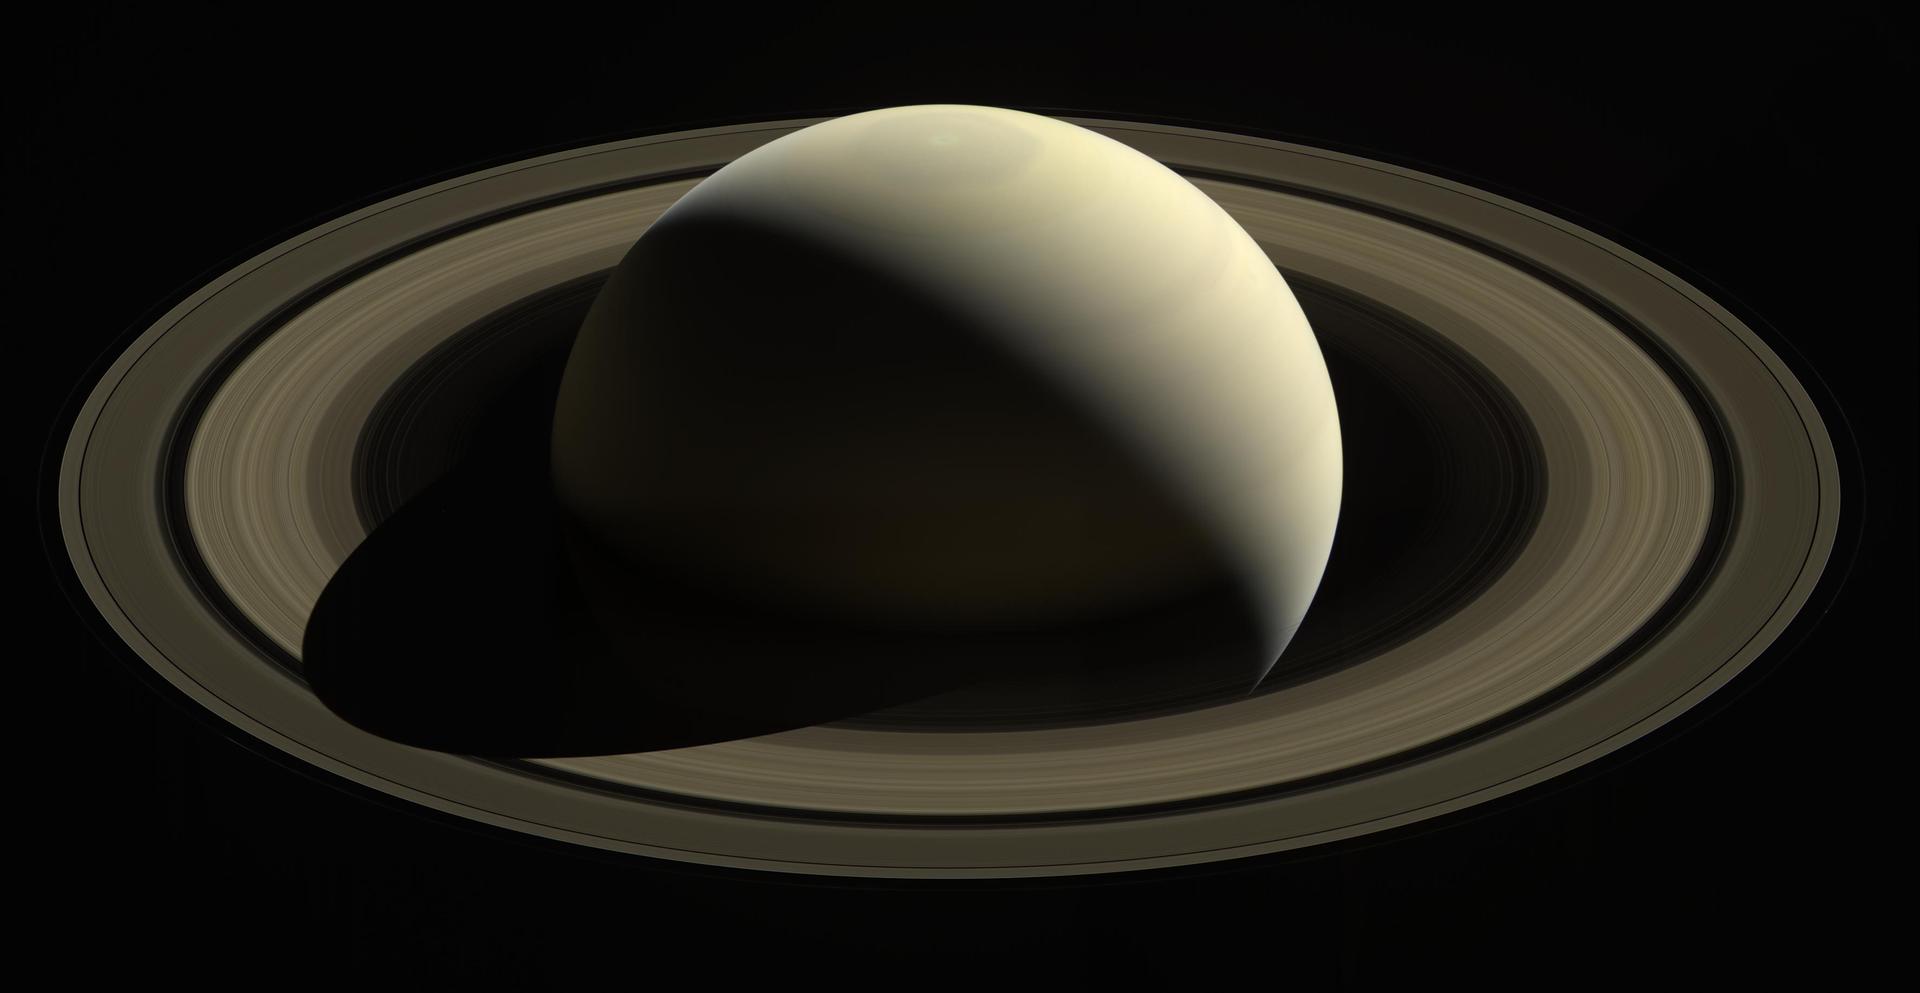 Saturn has been Cassini's home for 13 years.